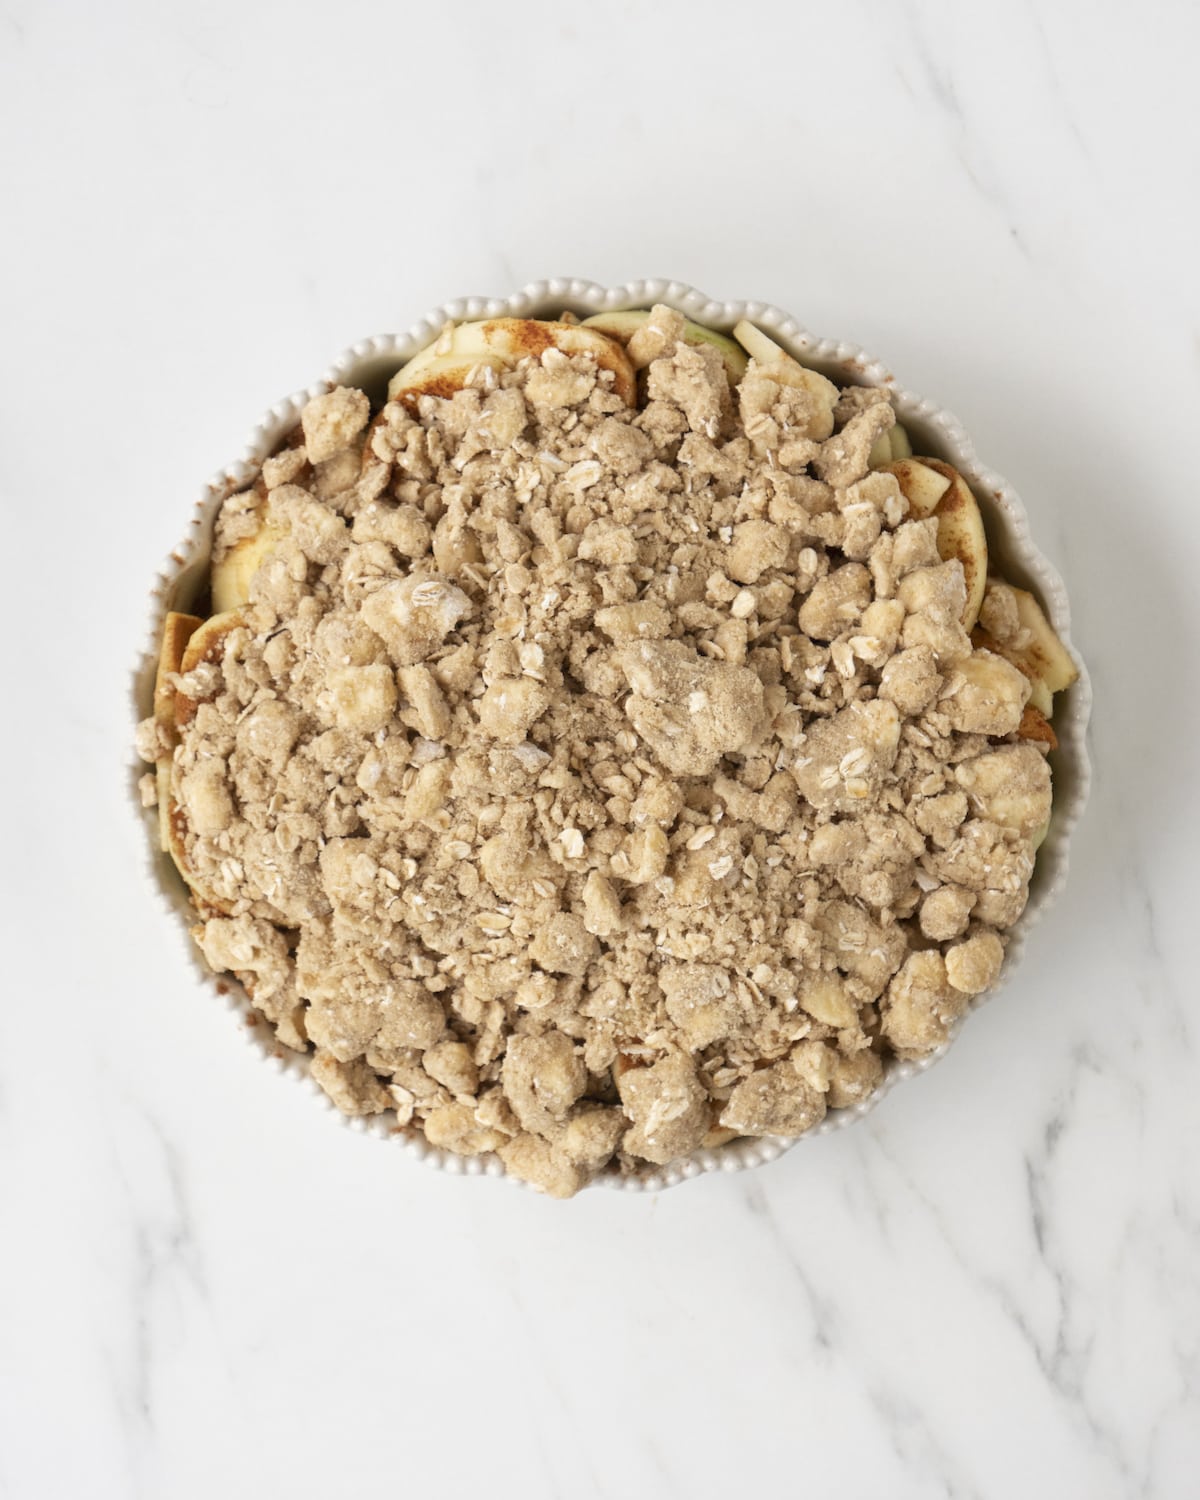 Ceramic baking dish of sliced apples and cinnamon topped with streusel topping mixture on a white countertop.